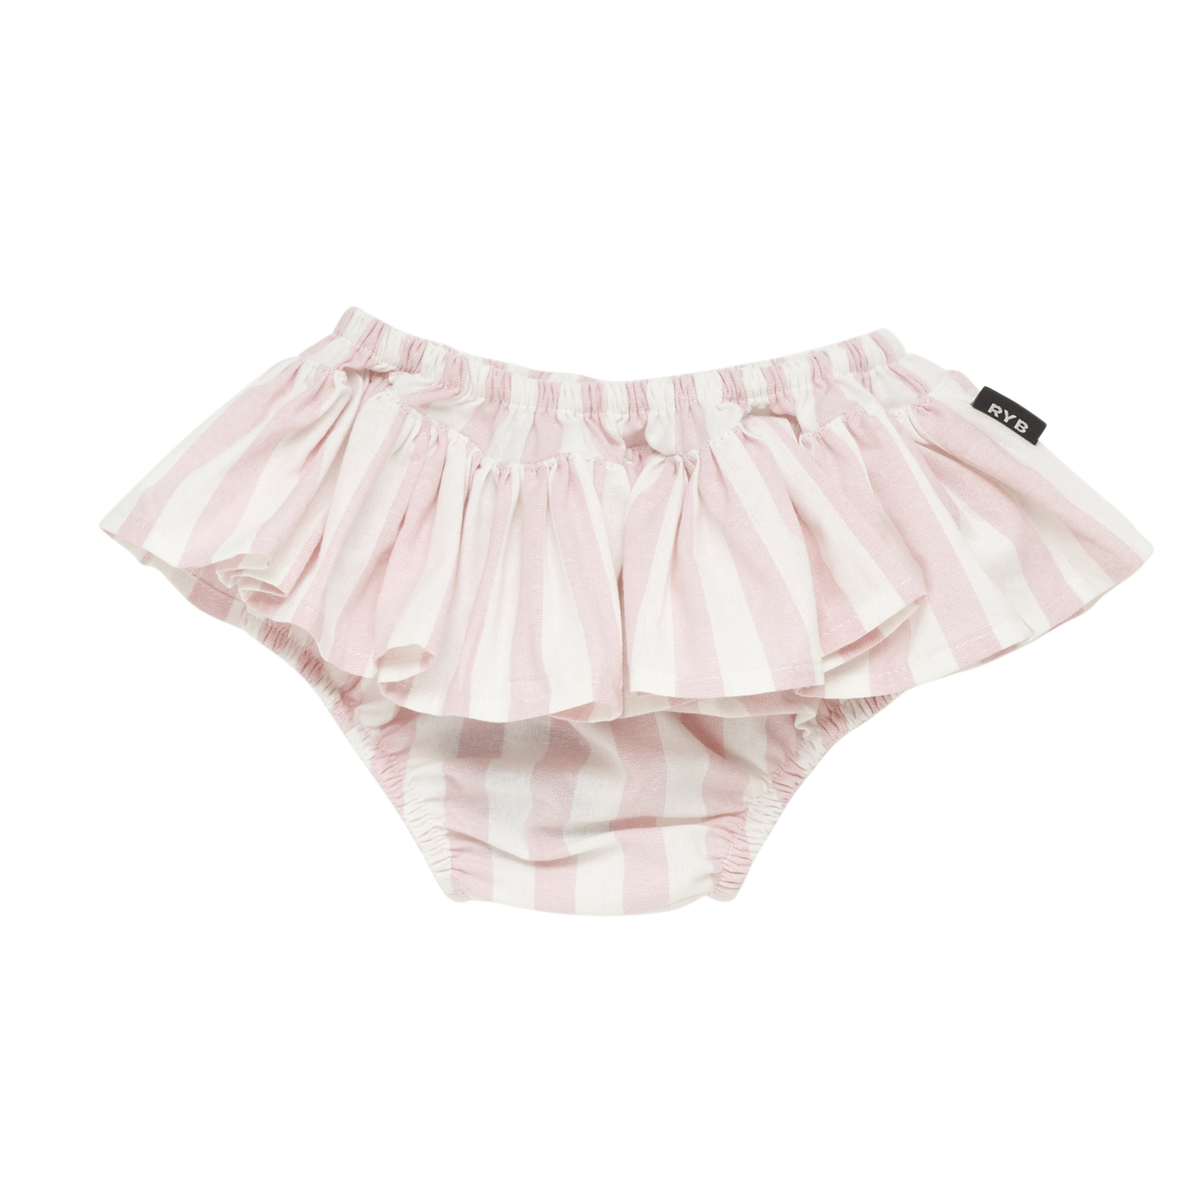 GIRLS STRIPE RUFFLE PANT |  LIGHT PINK AND WHITE | ROCK YOUR BABY | MELLIE & ME - Mellie & Me